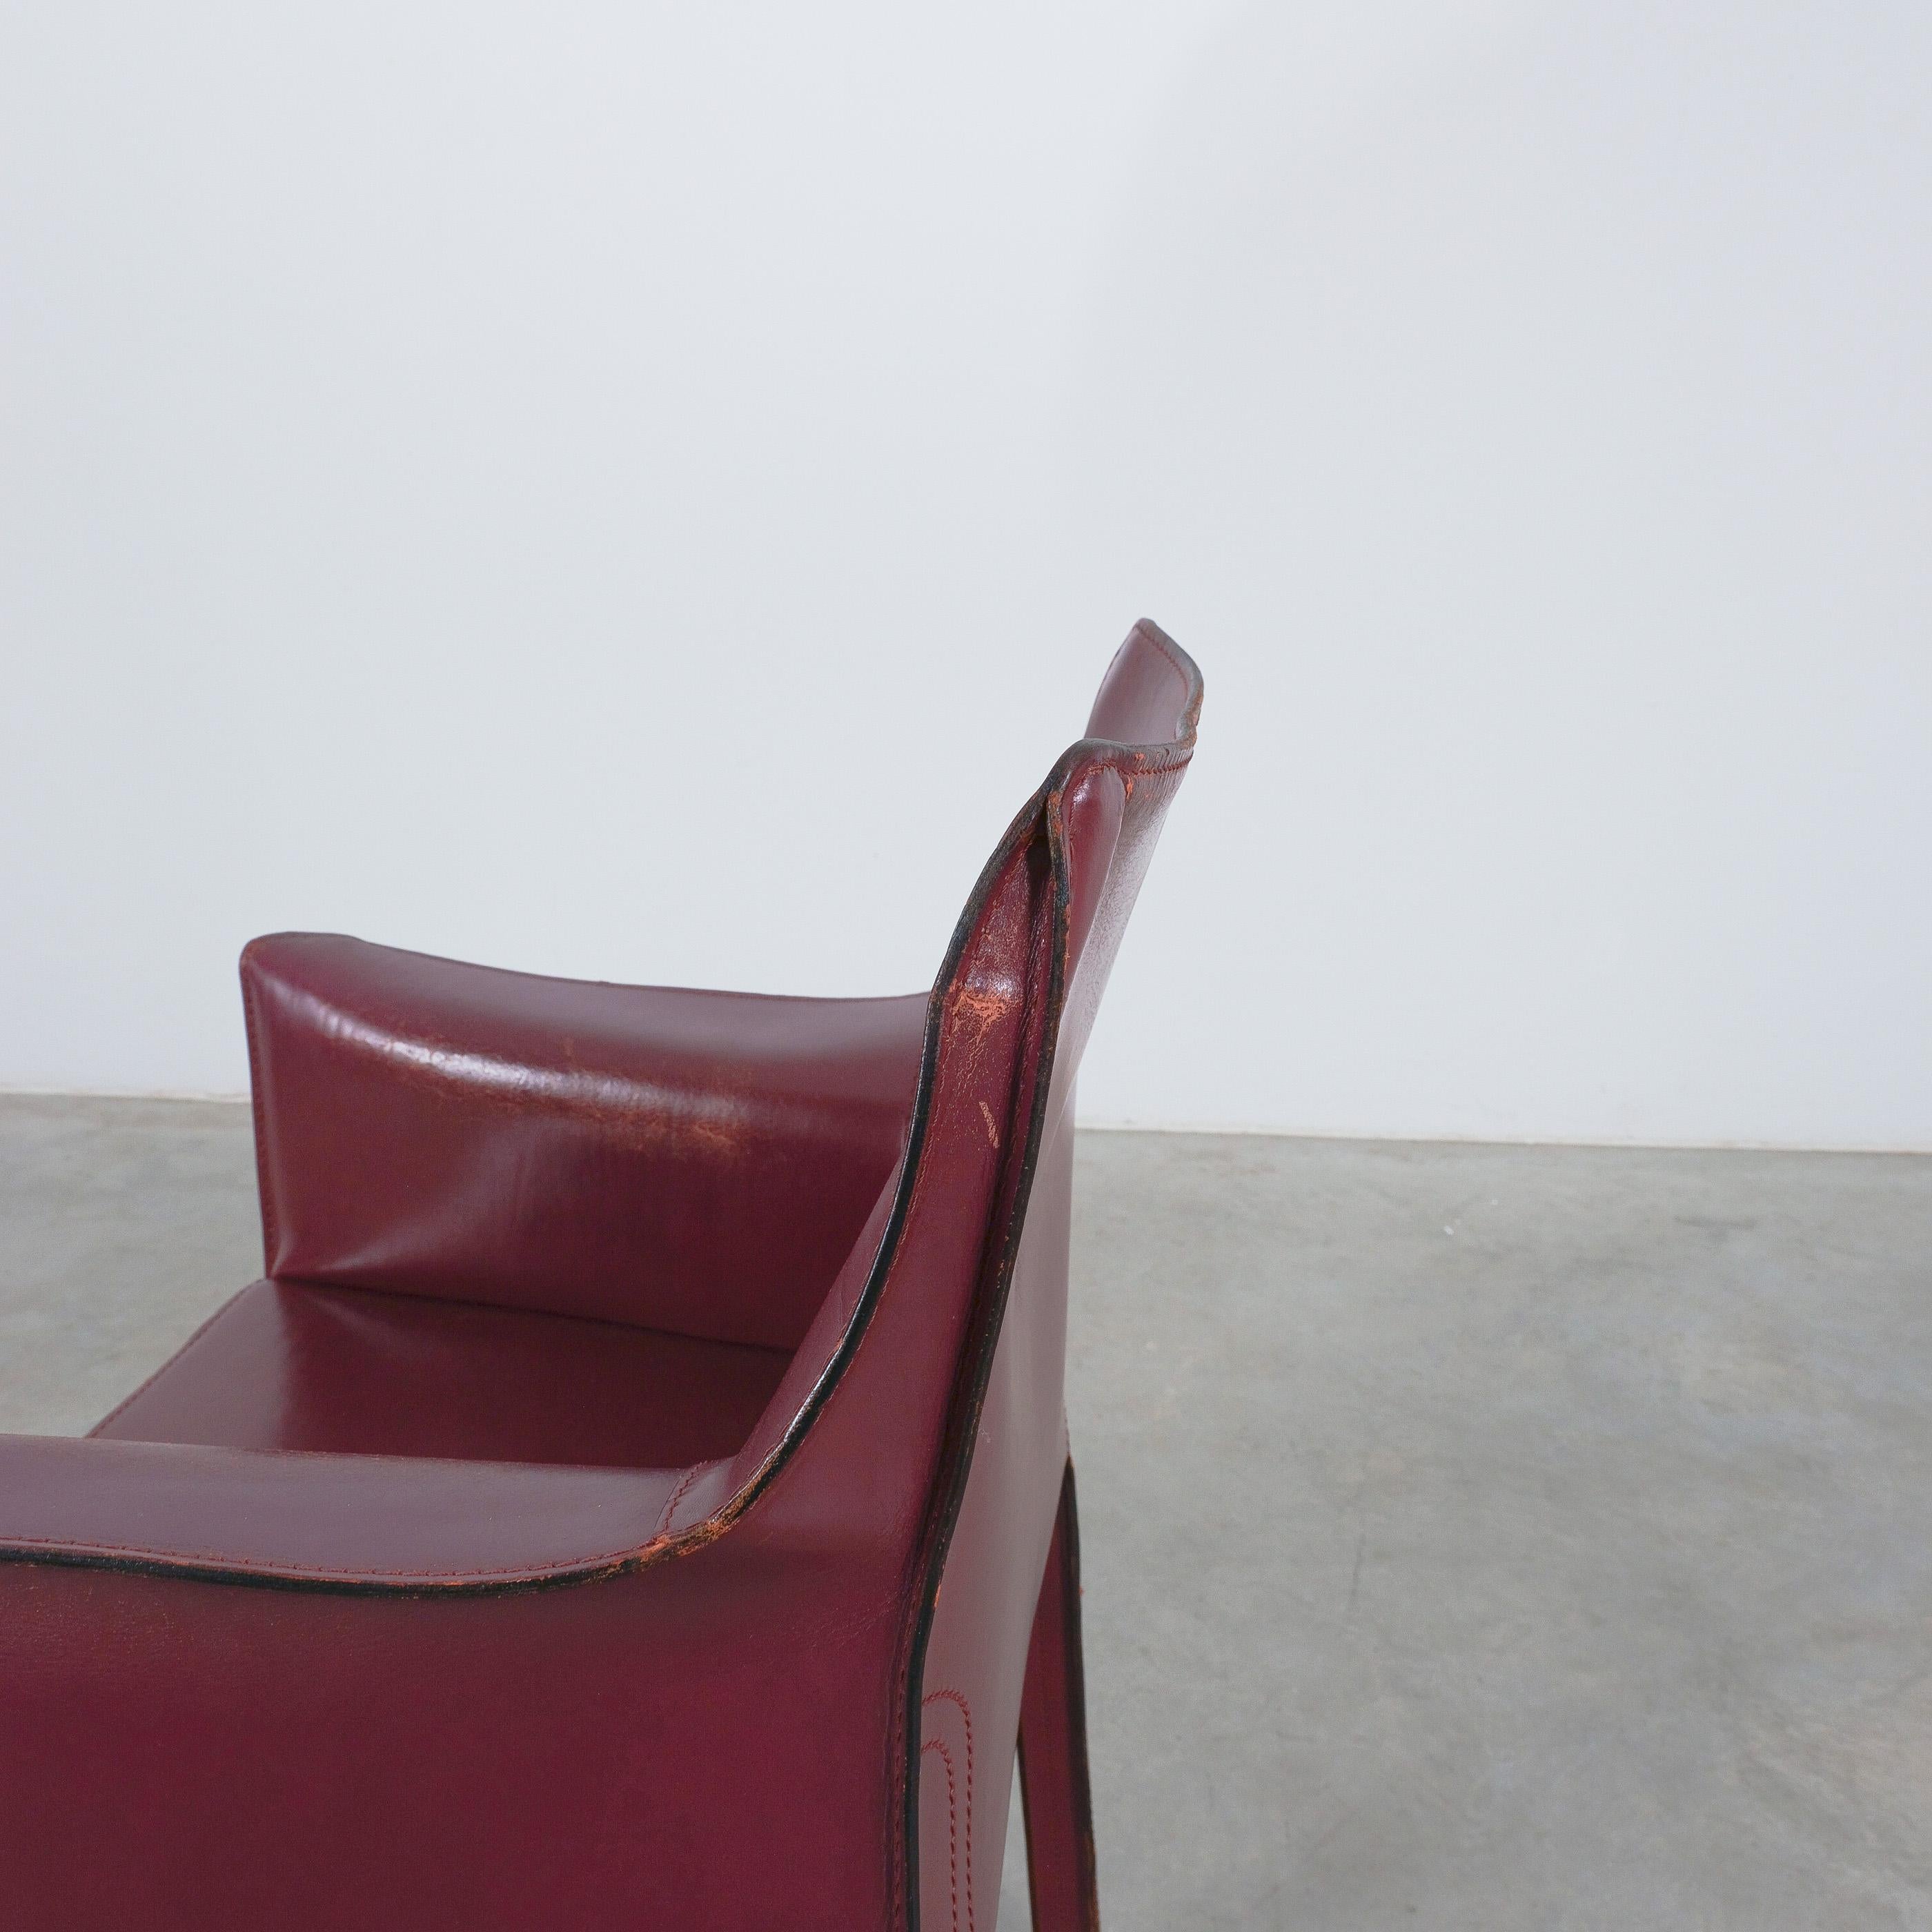 Mario Bellini Cassina Cab 413 Burgundy Red Leather Dining Chairs, 1980 For Sale 7